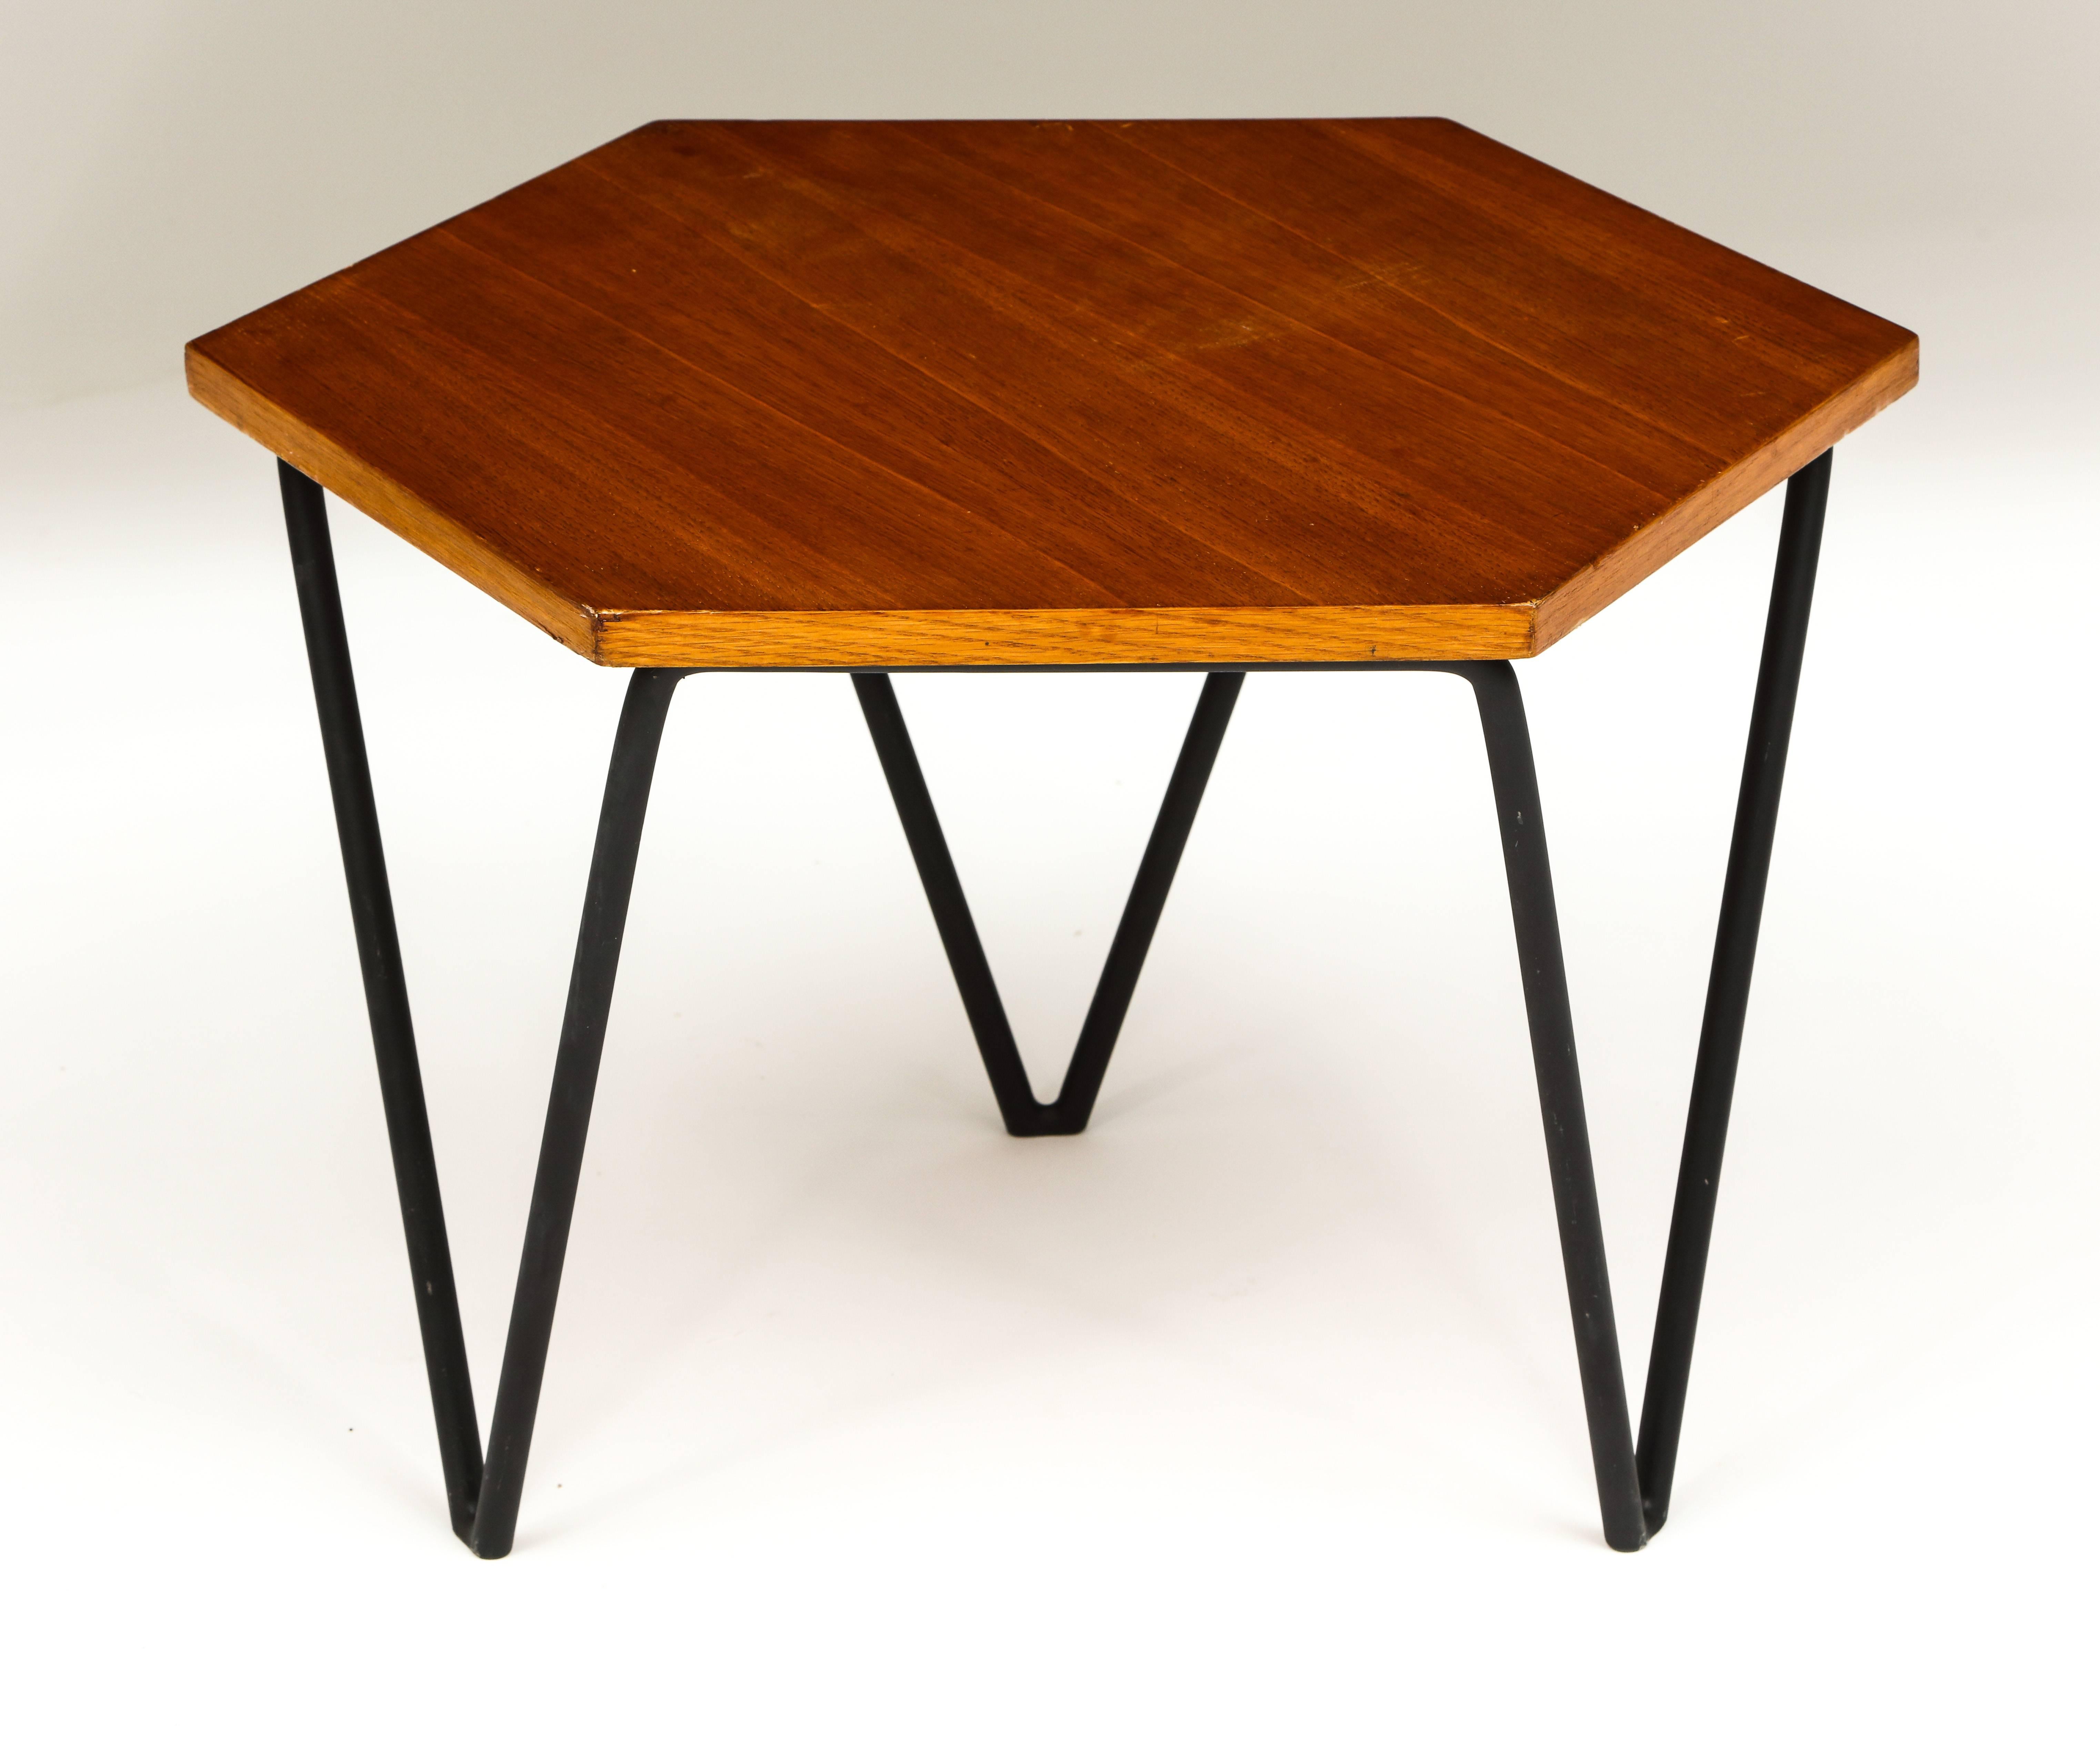 Mid-Century Modern Gio Ponti Side Table by ISA, Wood and Iron, 1950s, Midcentury, Italy